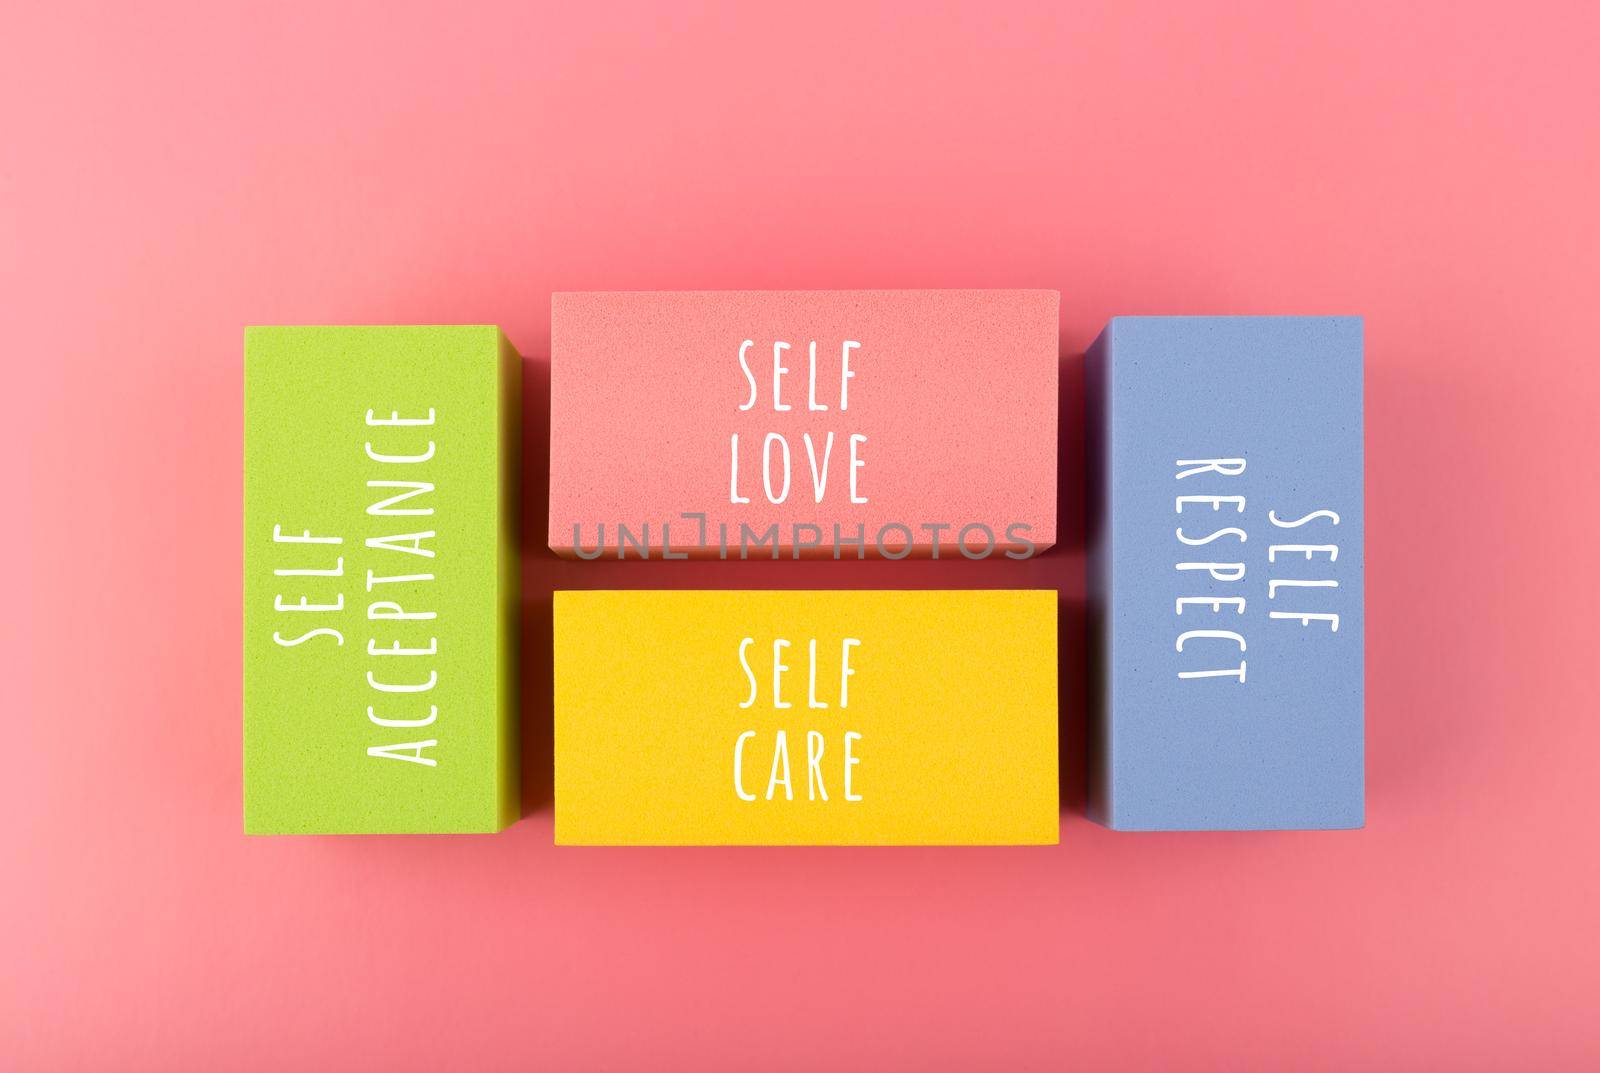 Self respect, acceptance, care and love written on multicolored rectangles on pink background. Mental and psychological health self love and wellness concept.